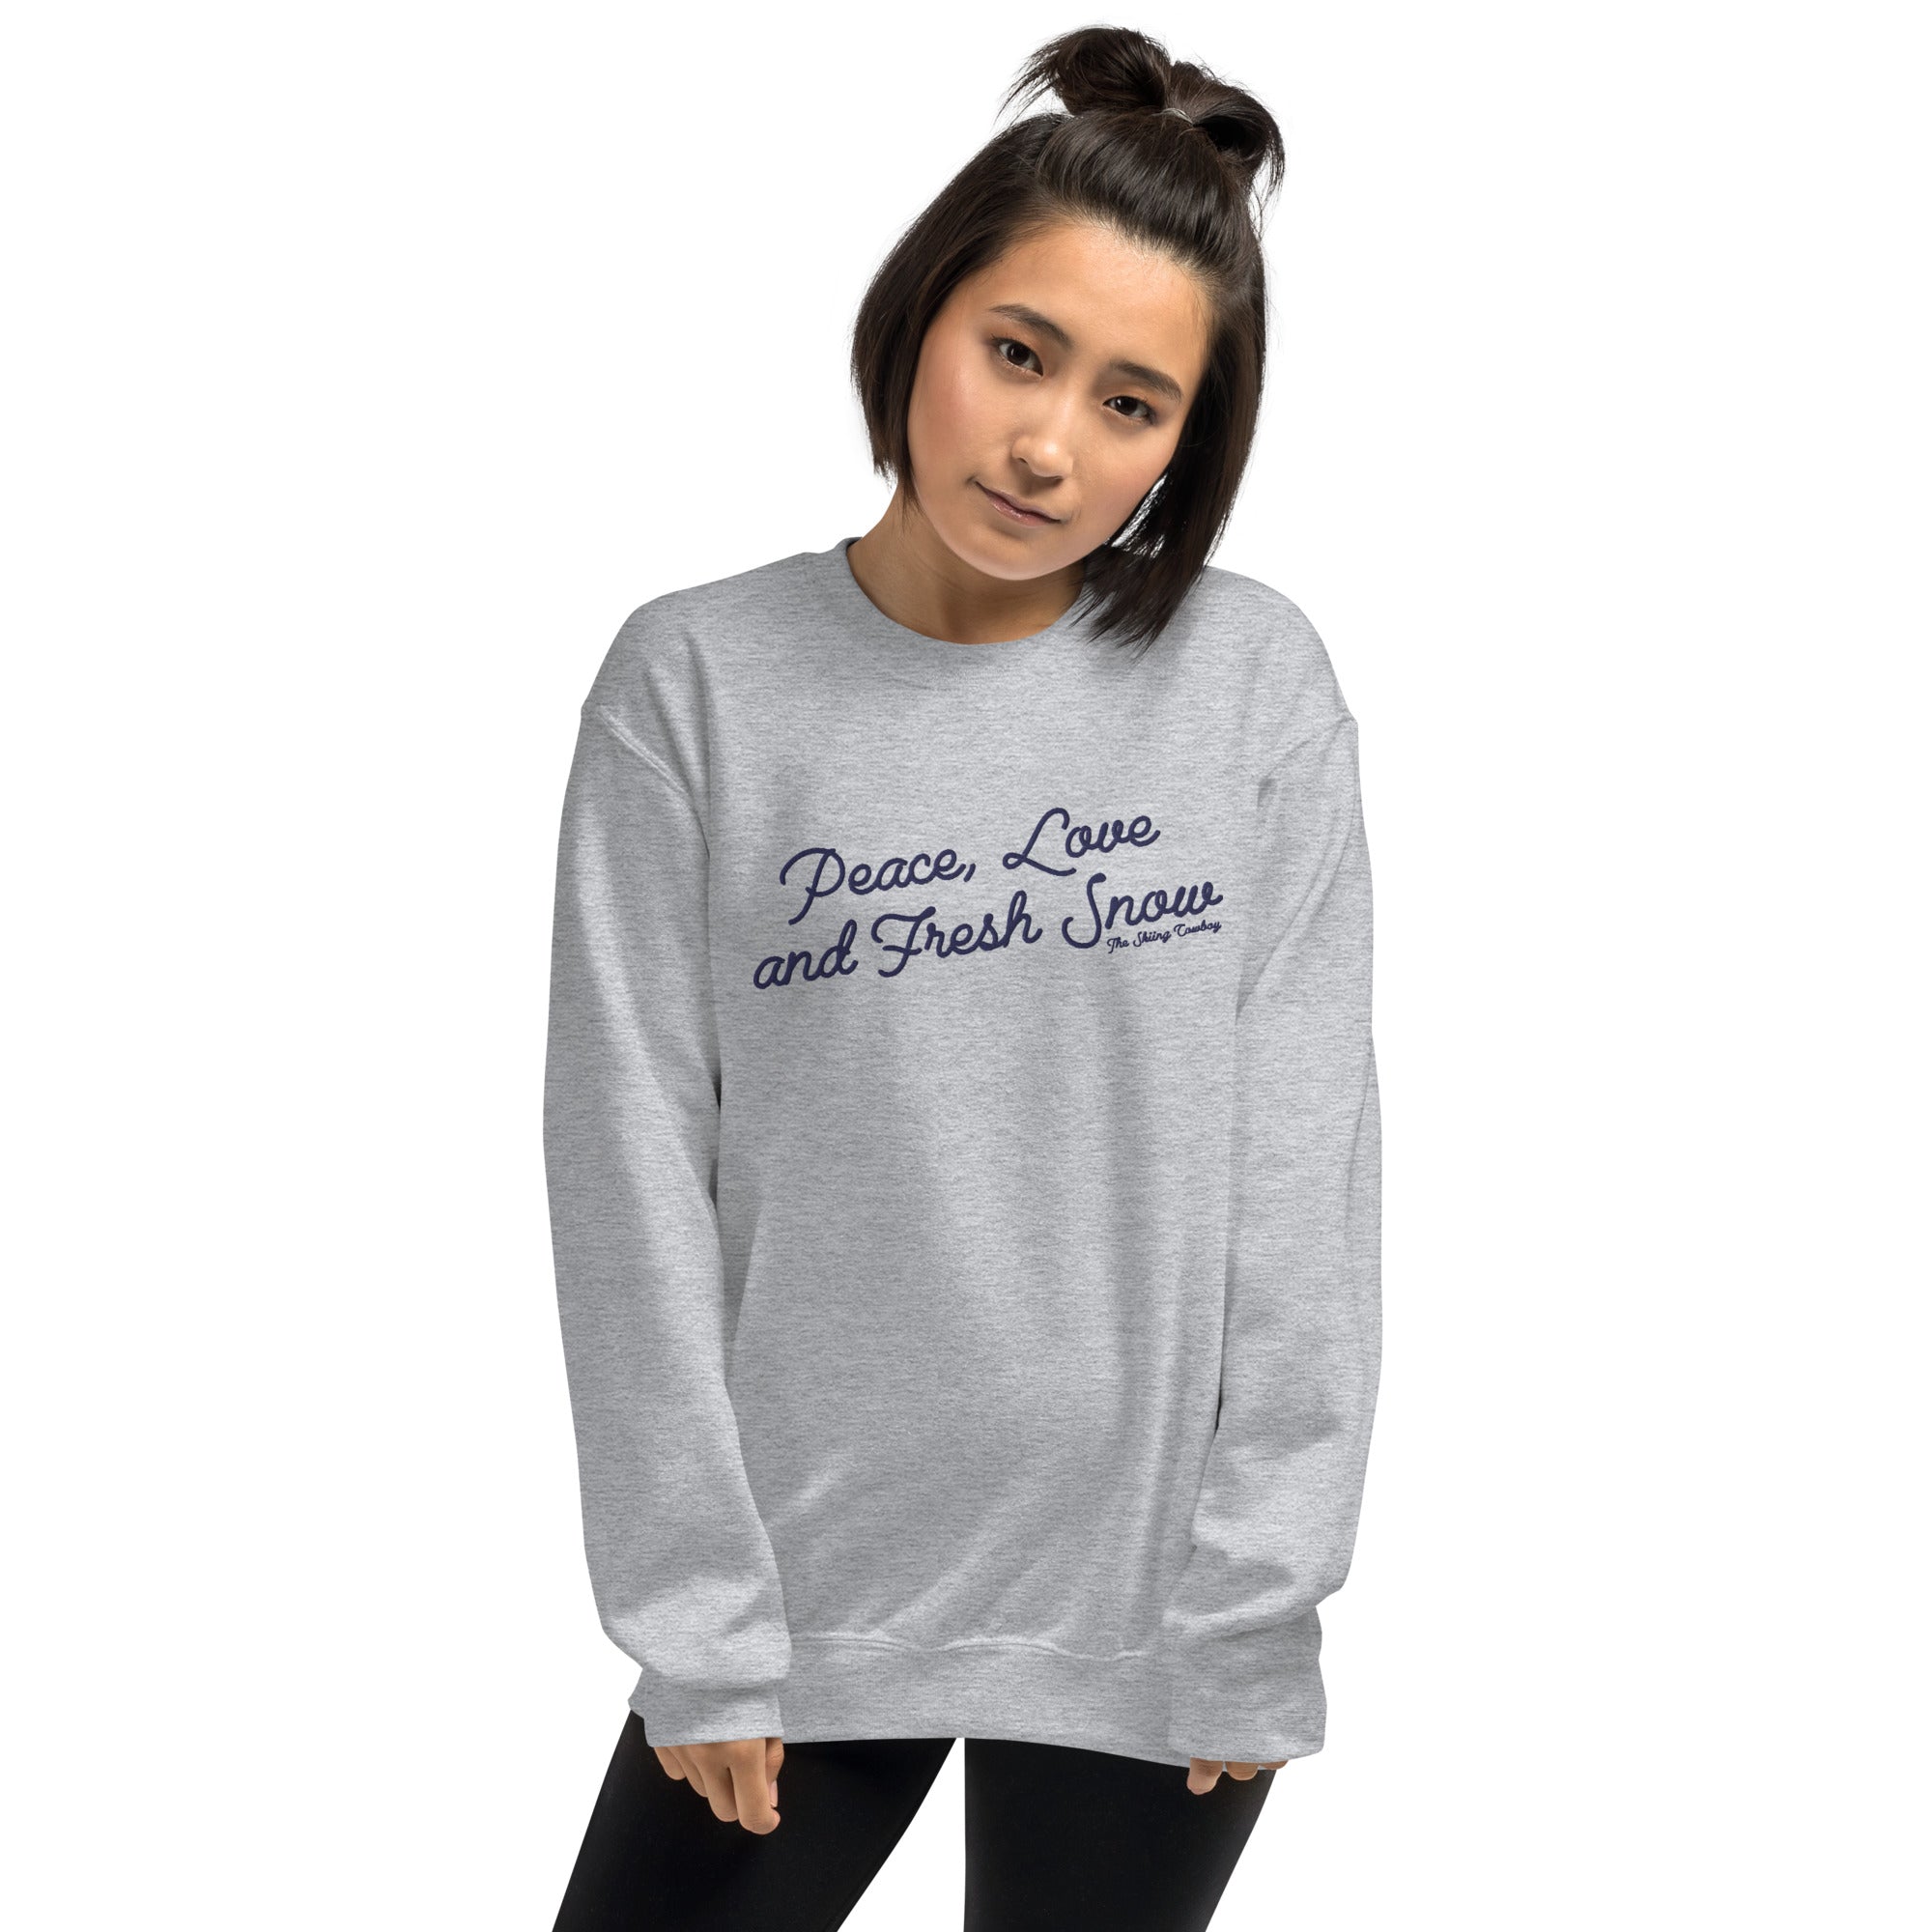 Unisex Sweatshirt Peace, Love and Fresh Snow large navy embroidered pattern